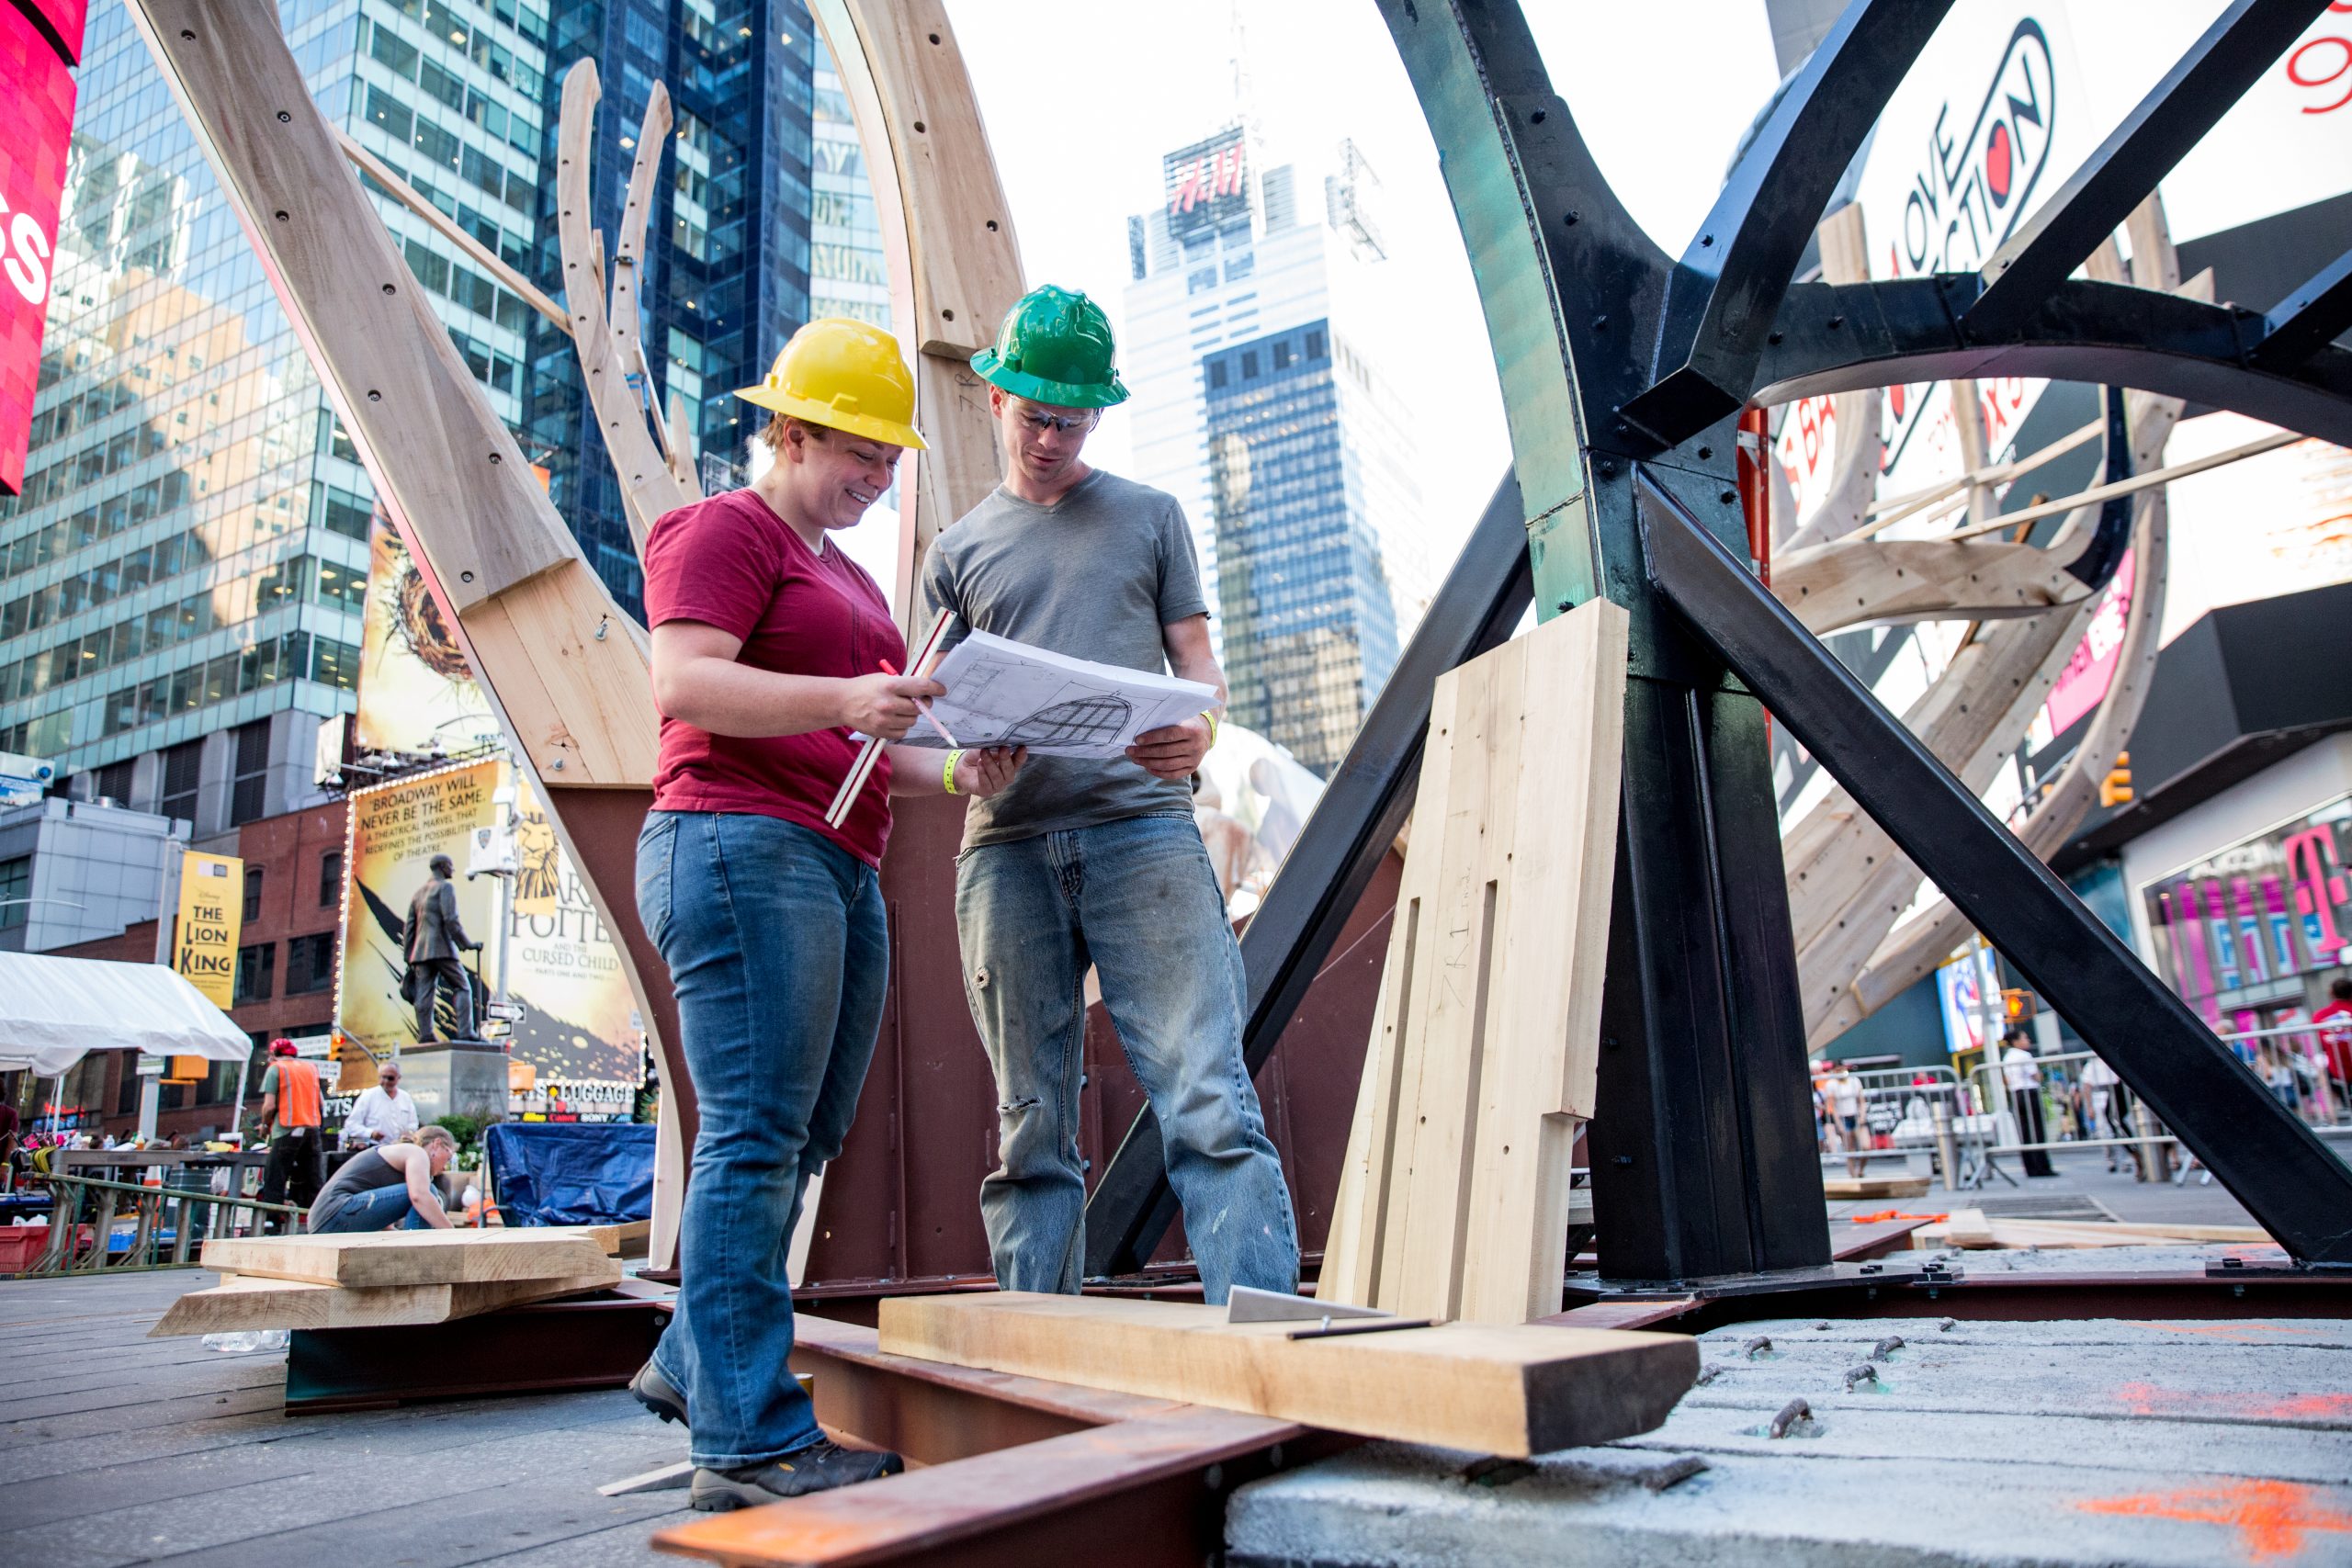 Two people constructing a STEAM studio art sculpture in times square